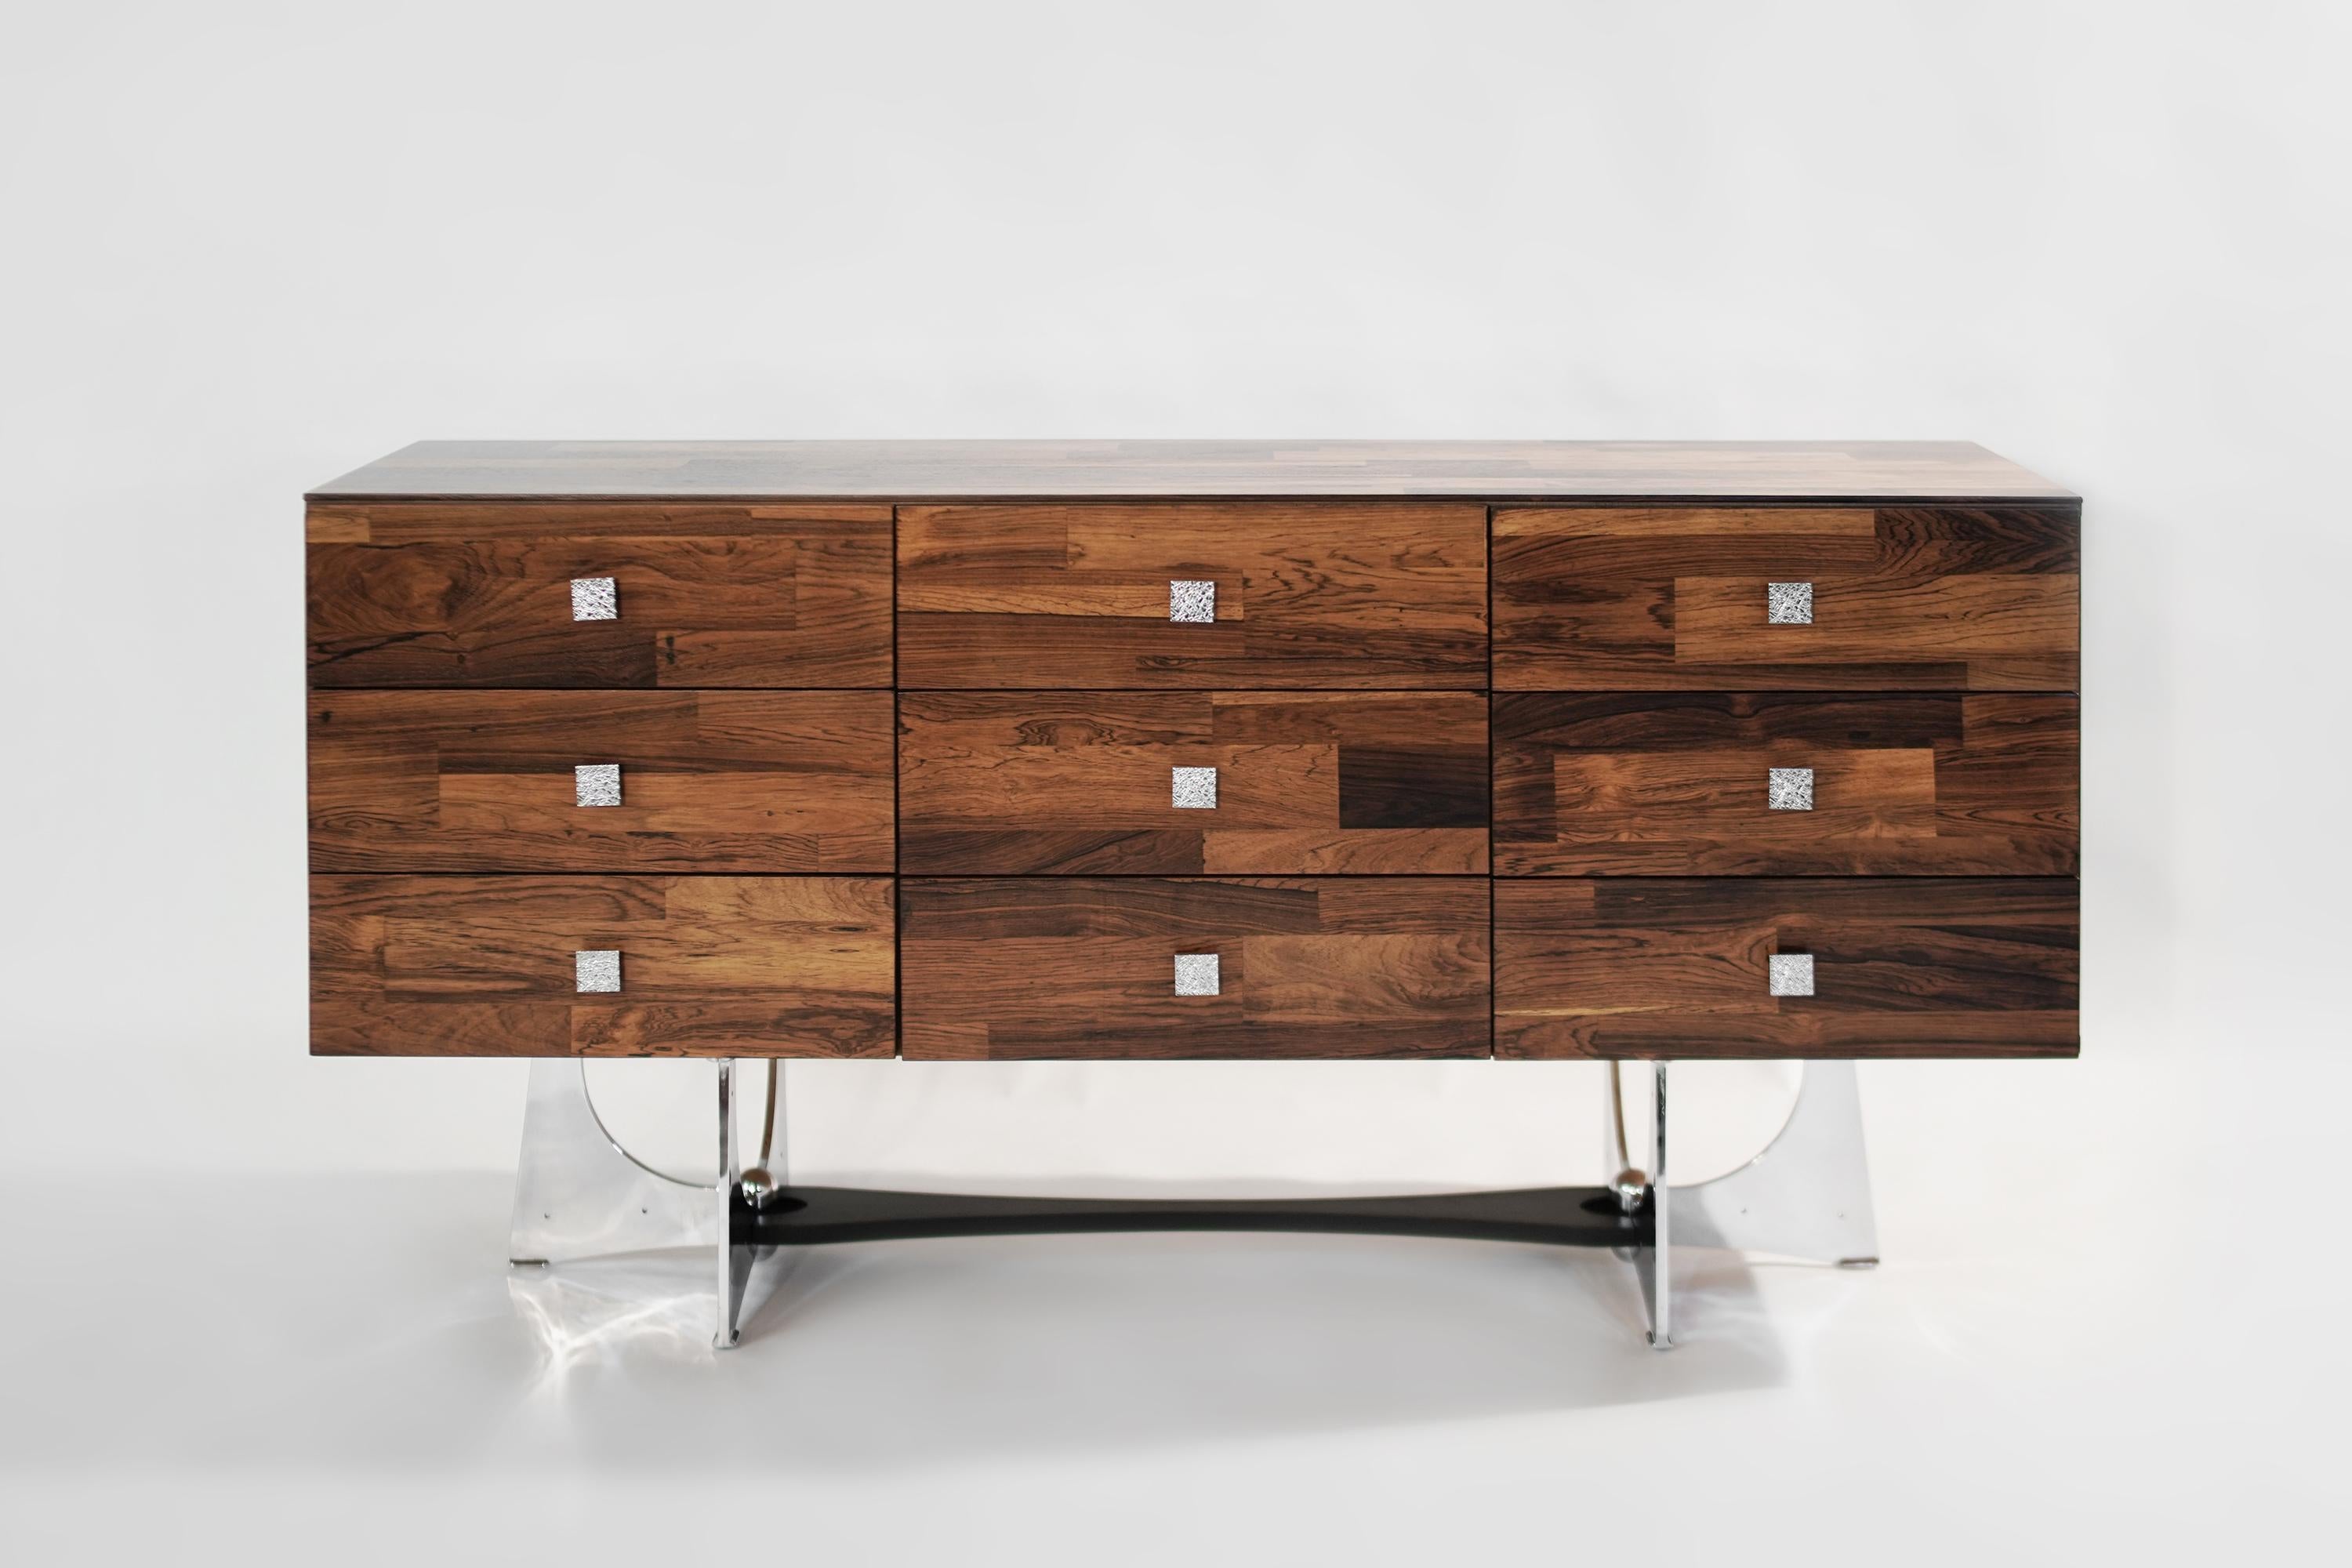 Rosewood dresser designed by Henri Valliere, Canada, 1950s.
This case piece features, brutalist style nickel base and hardware. A total of 9 drawers provides ample storage space for either dining room or bedroom setting.